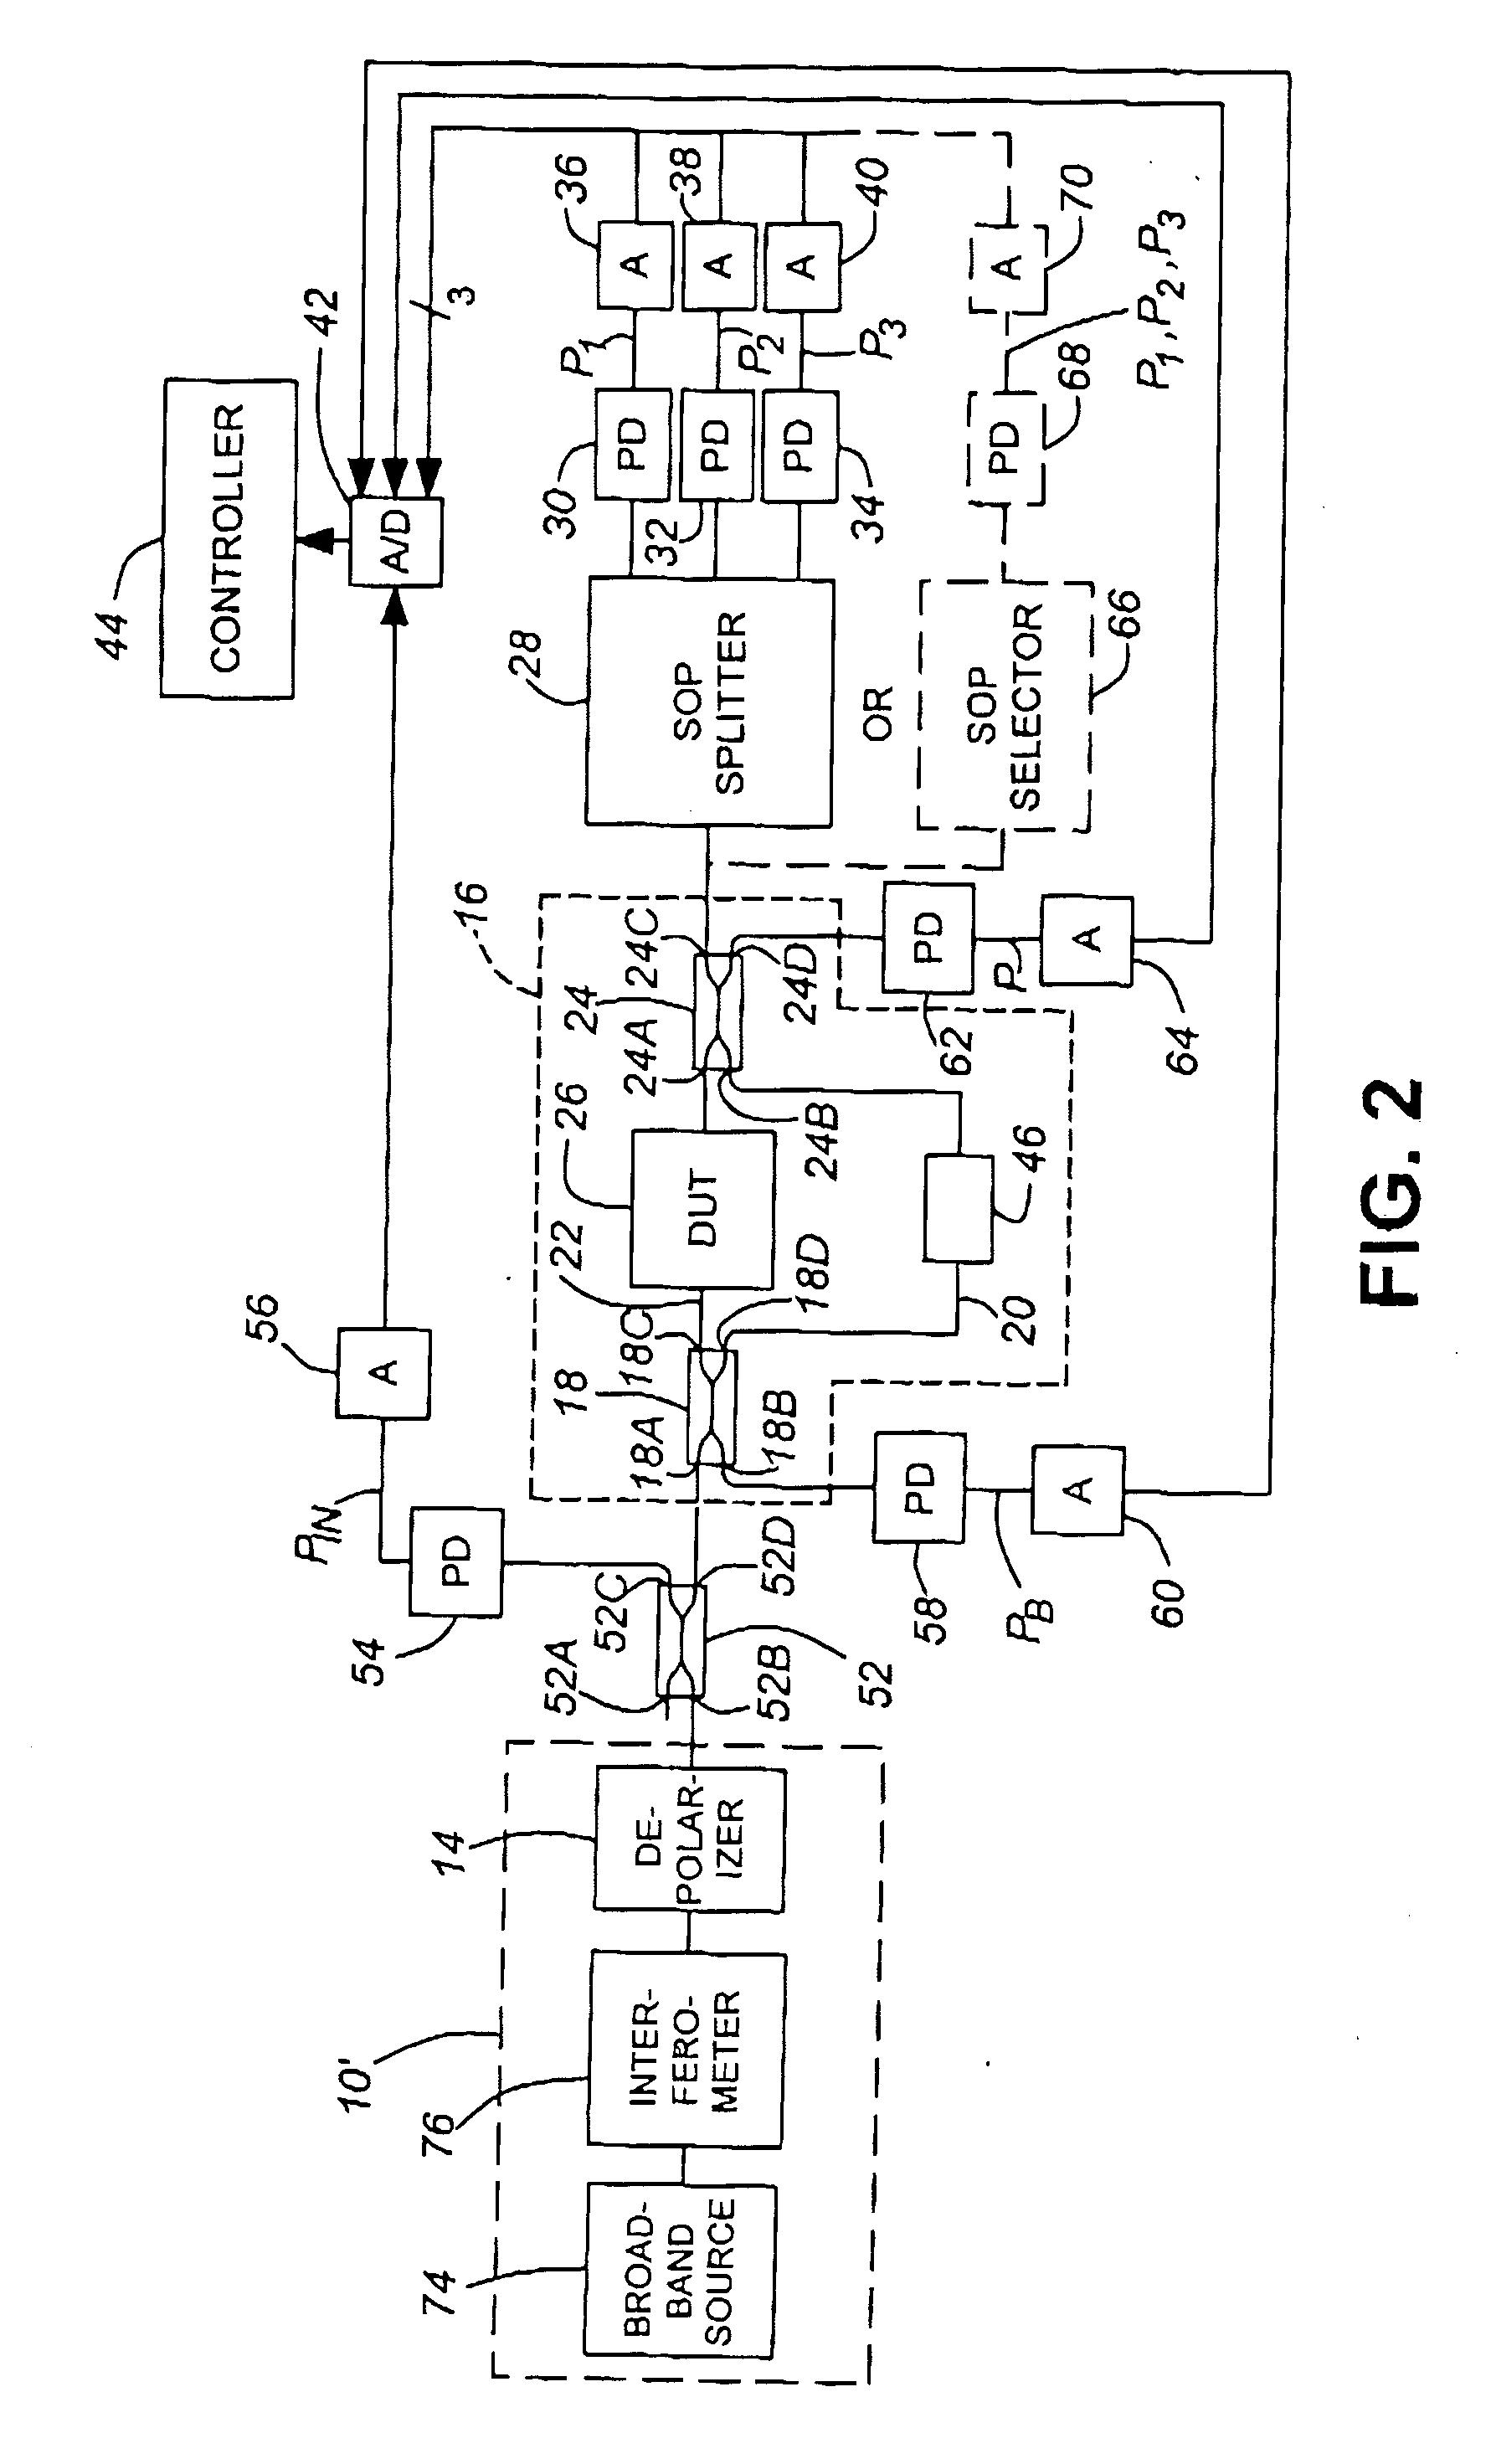 Interferometric optical analyzer and method for measuring the linear response of an optical component